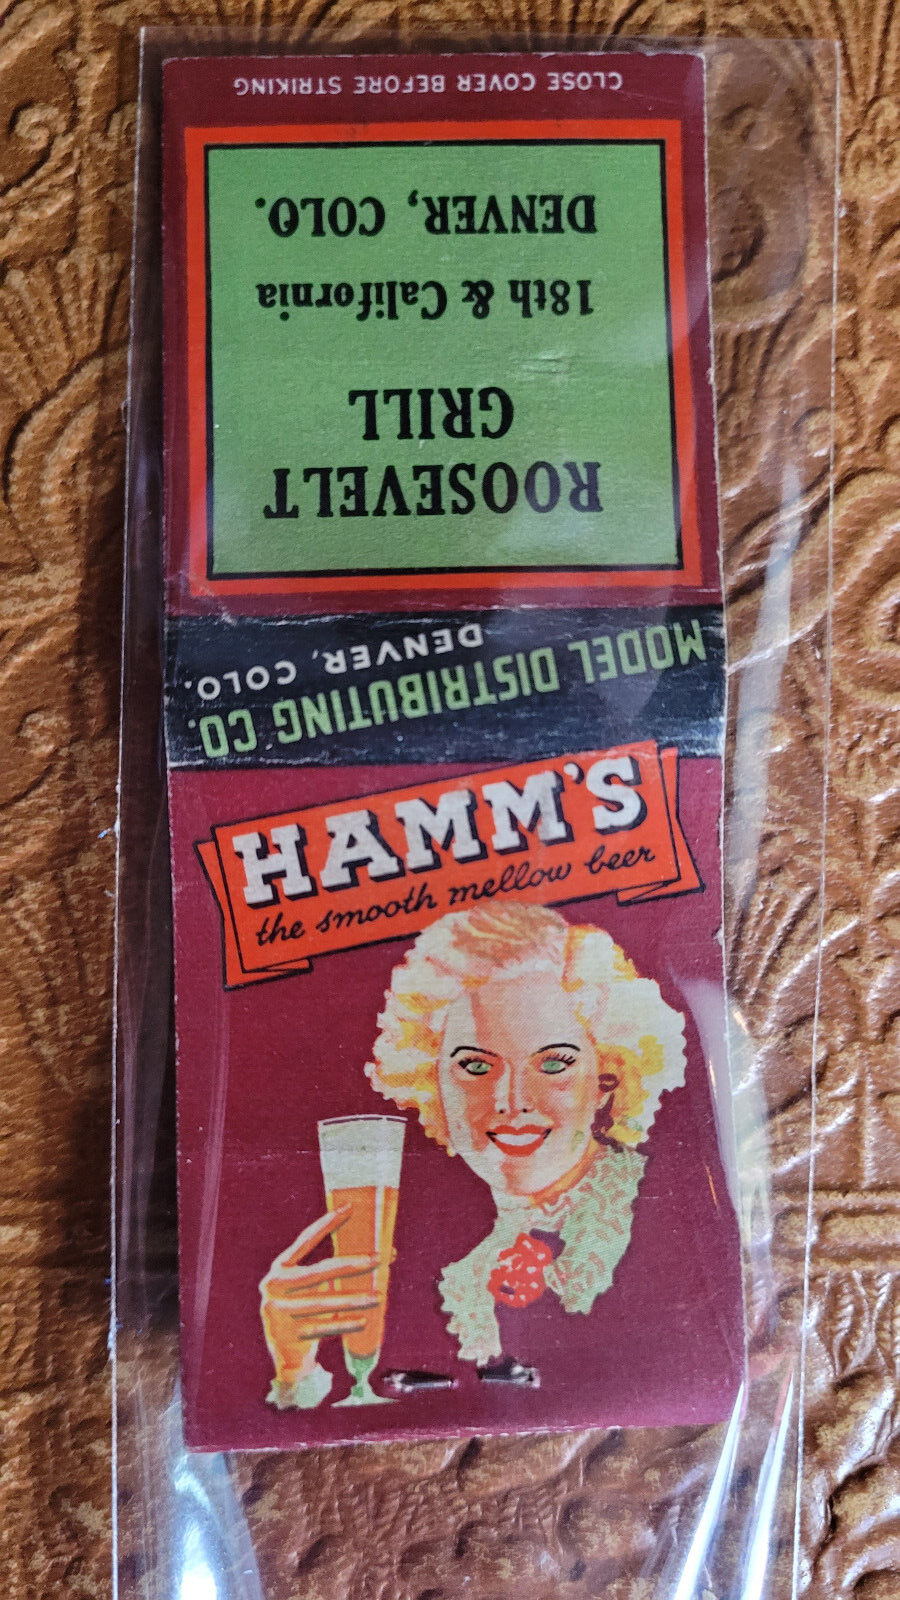 1930's Hamm's The Smooth Mello Beer Matchbook Match Cover